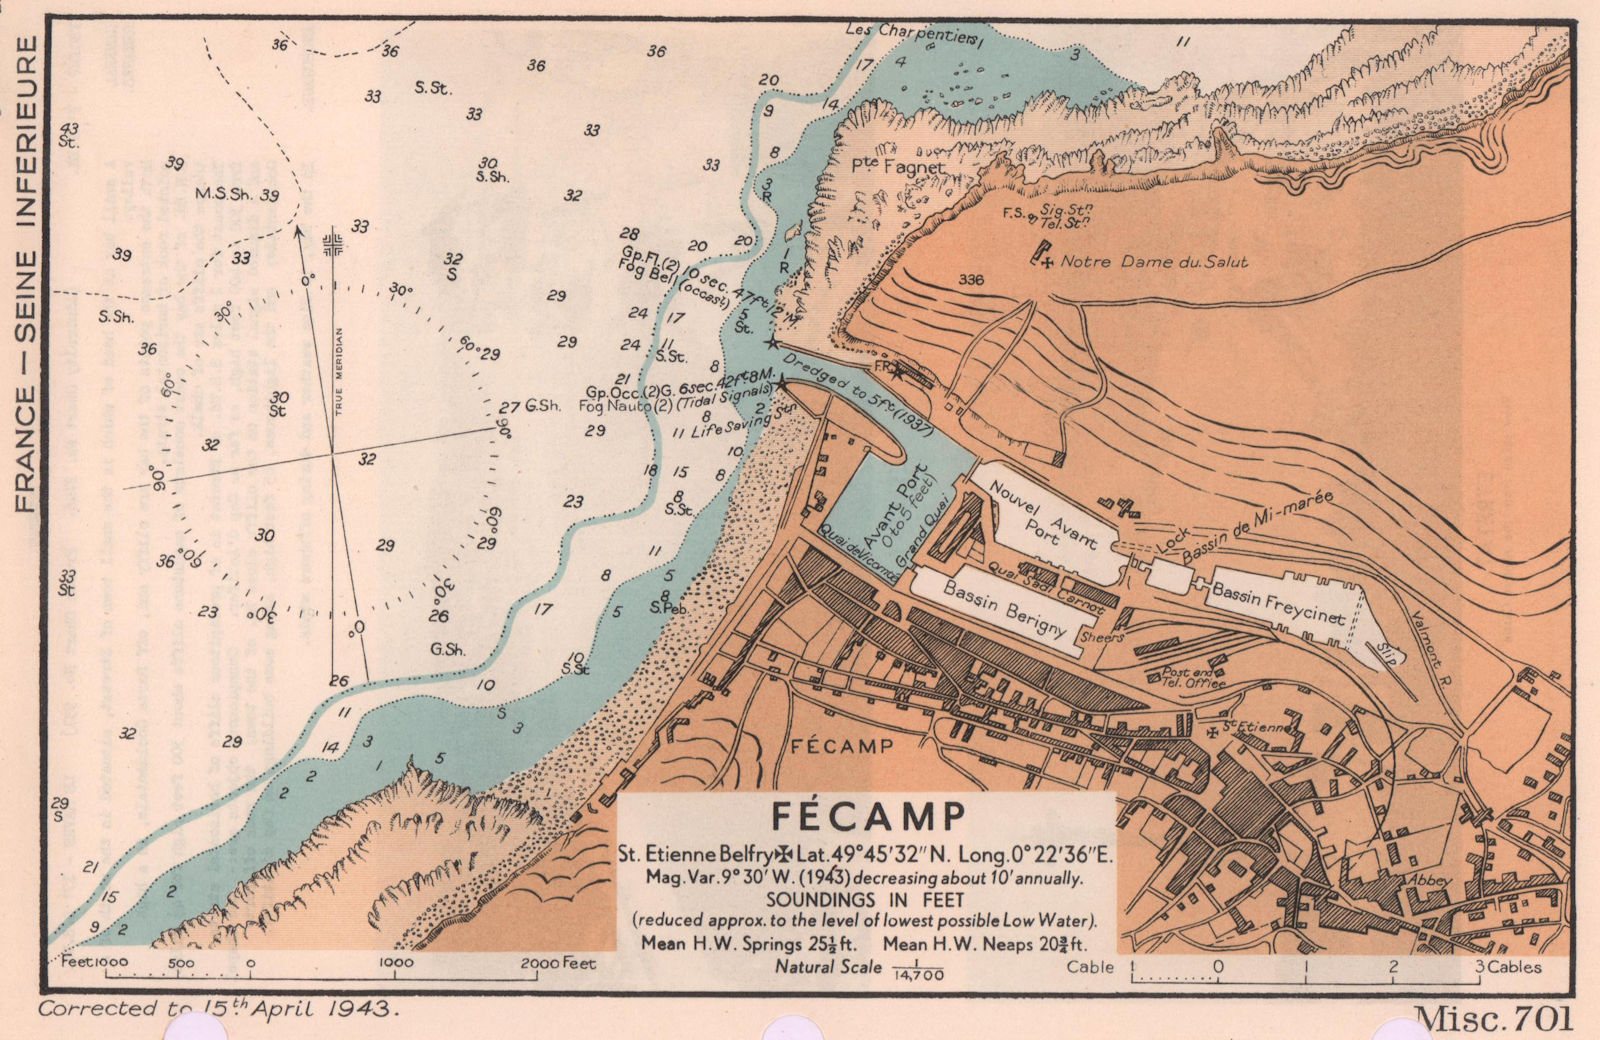 Associate Product Fécamp town plan & sea coast chart. D-Day planning map. ADMIRALTY 1943 old